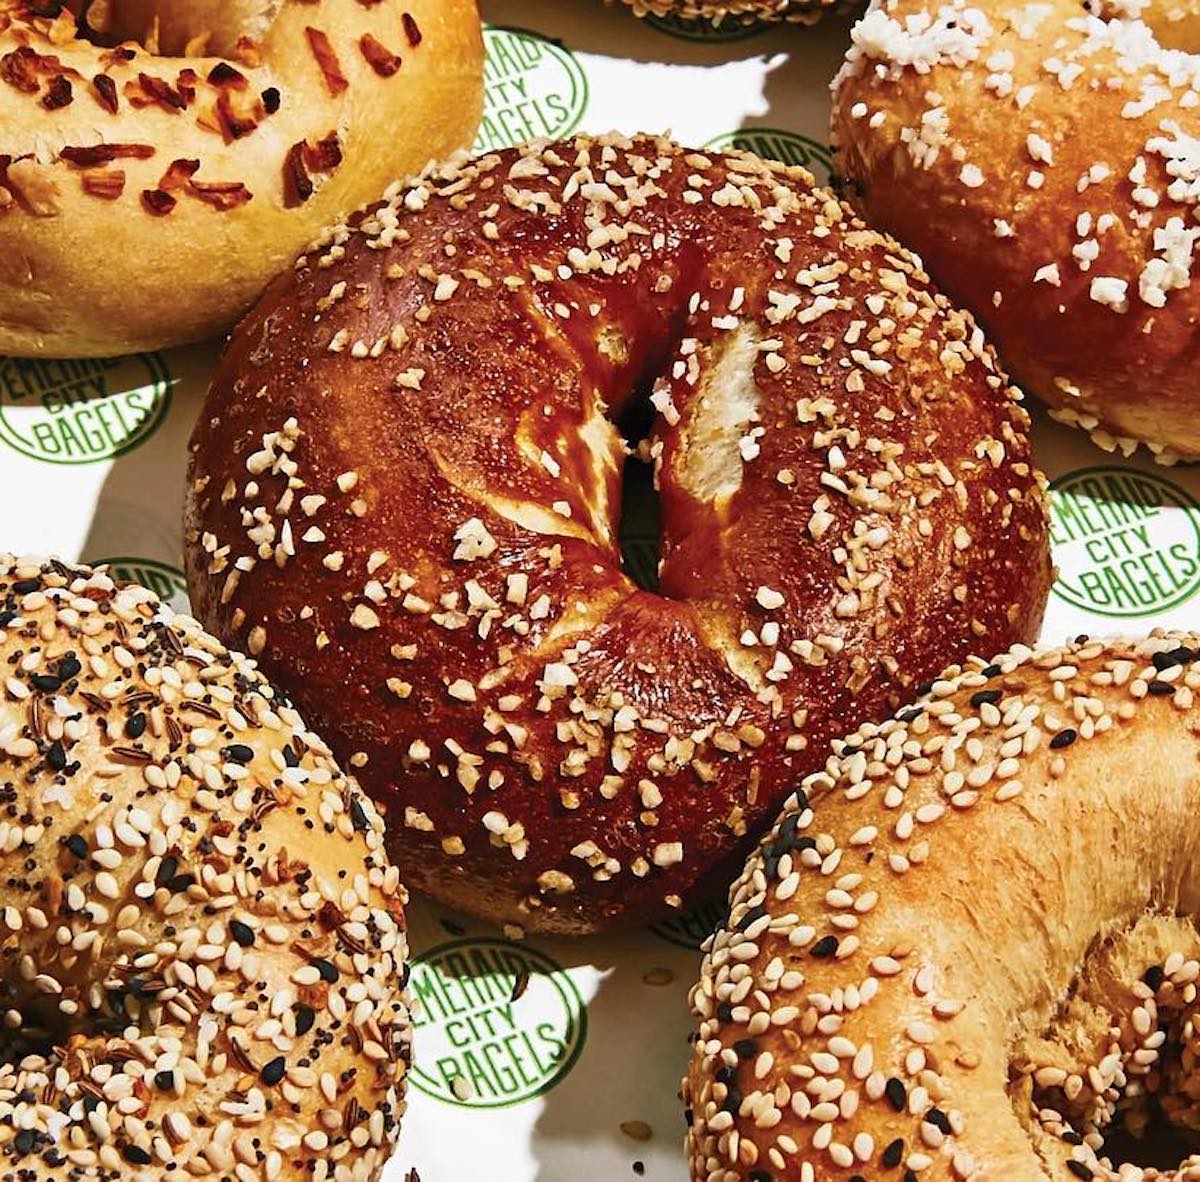 Emerald City Bringing Its NY-Style Bagels To The BeltLine